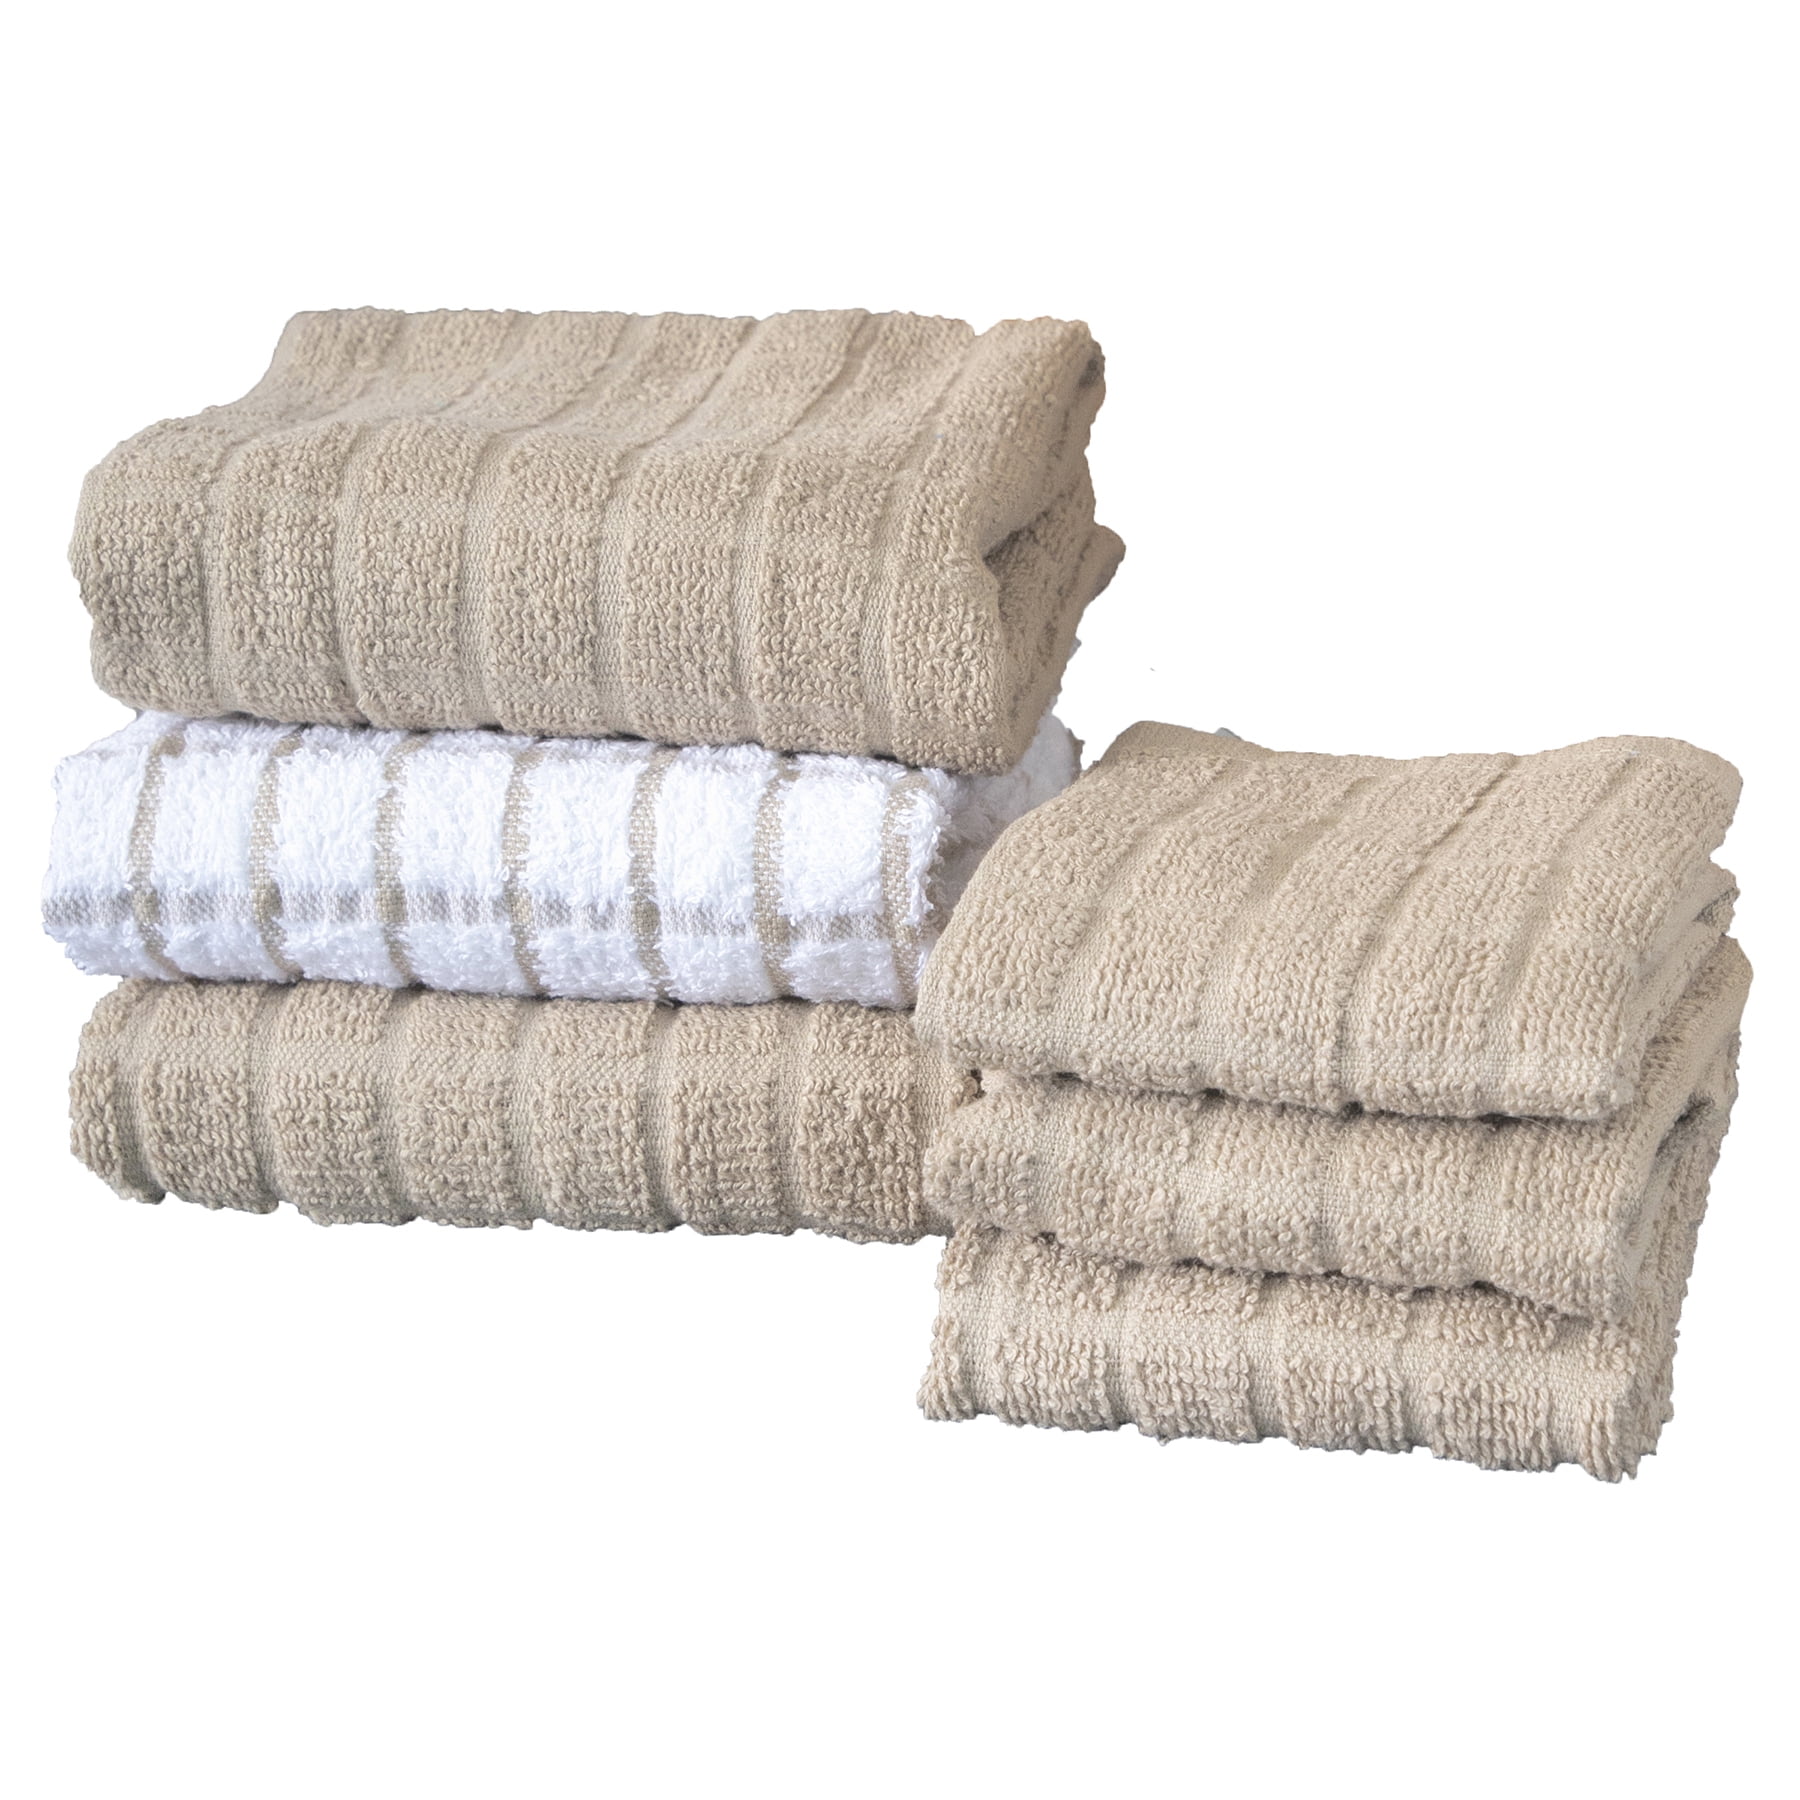 6 Pack Kitchen Towels And Dishcloths Sets100% Cotton Soft